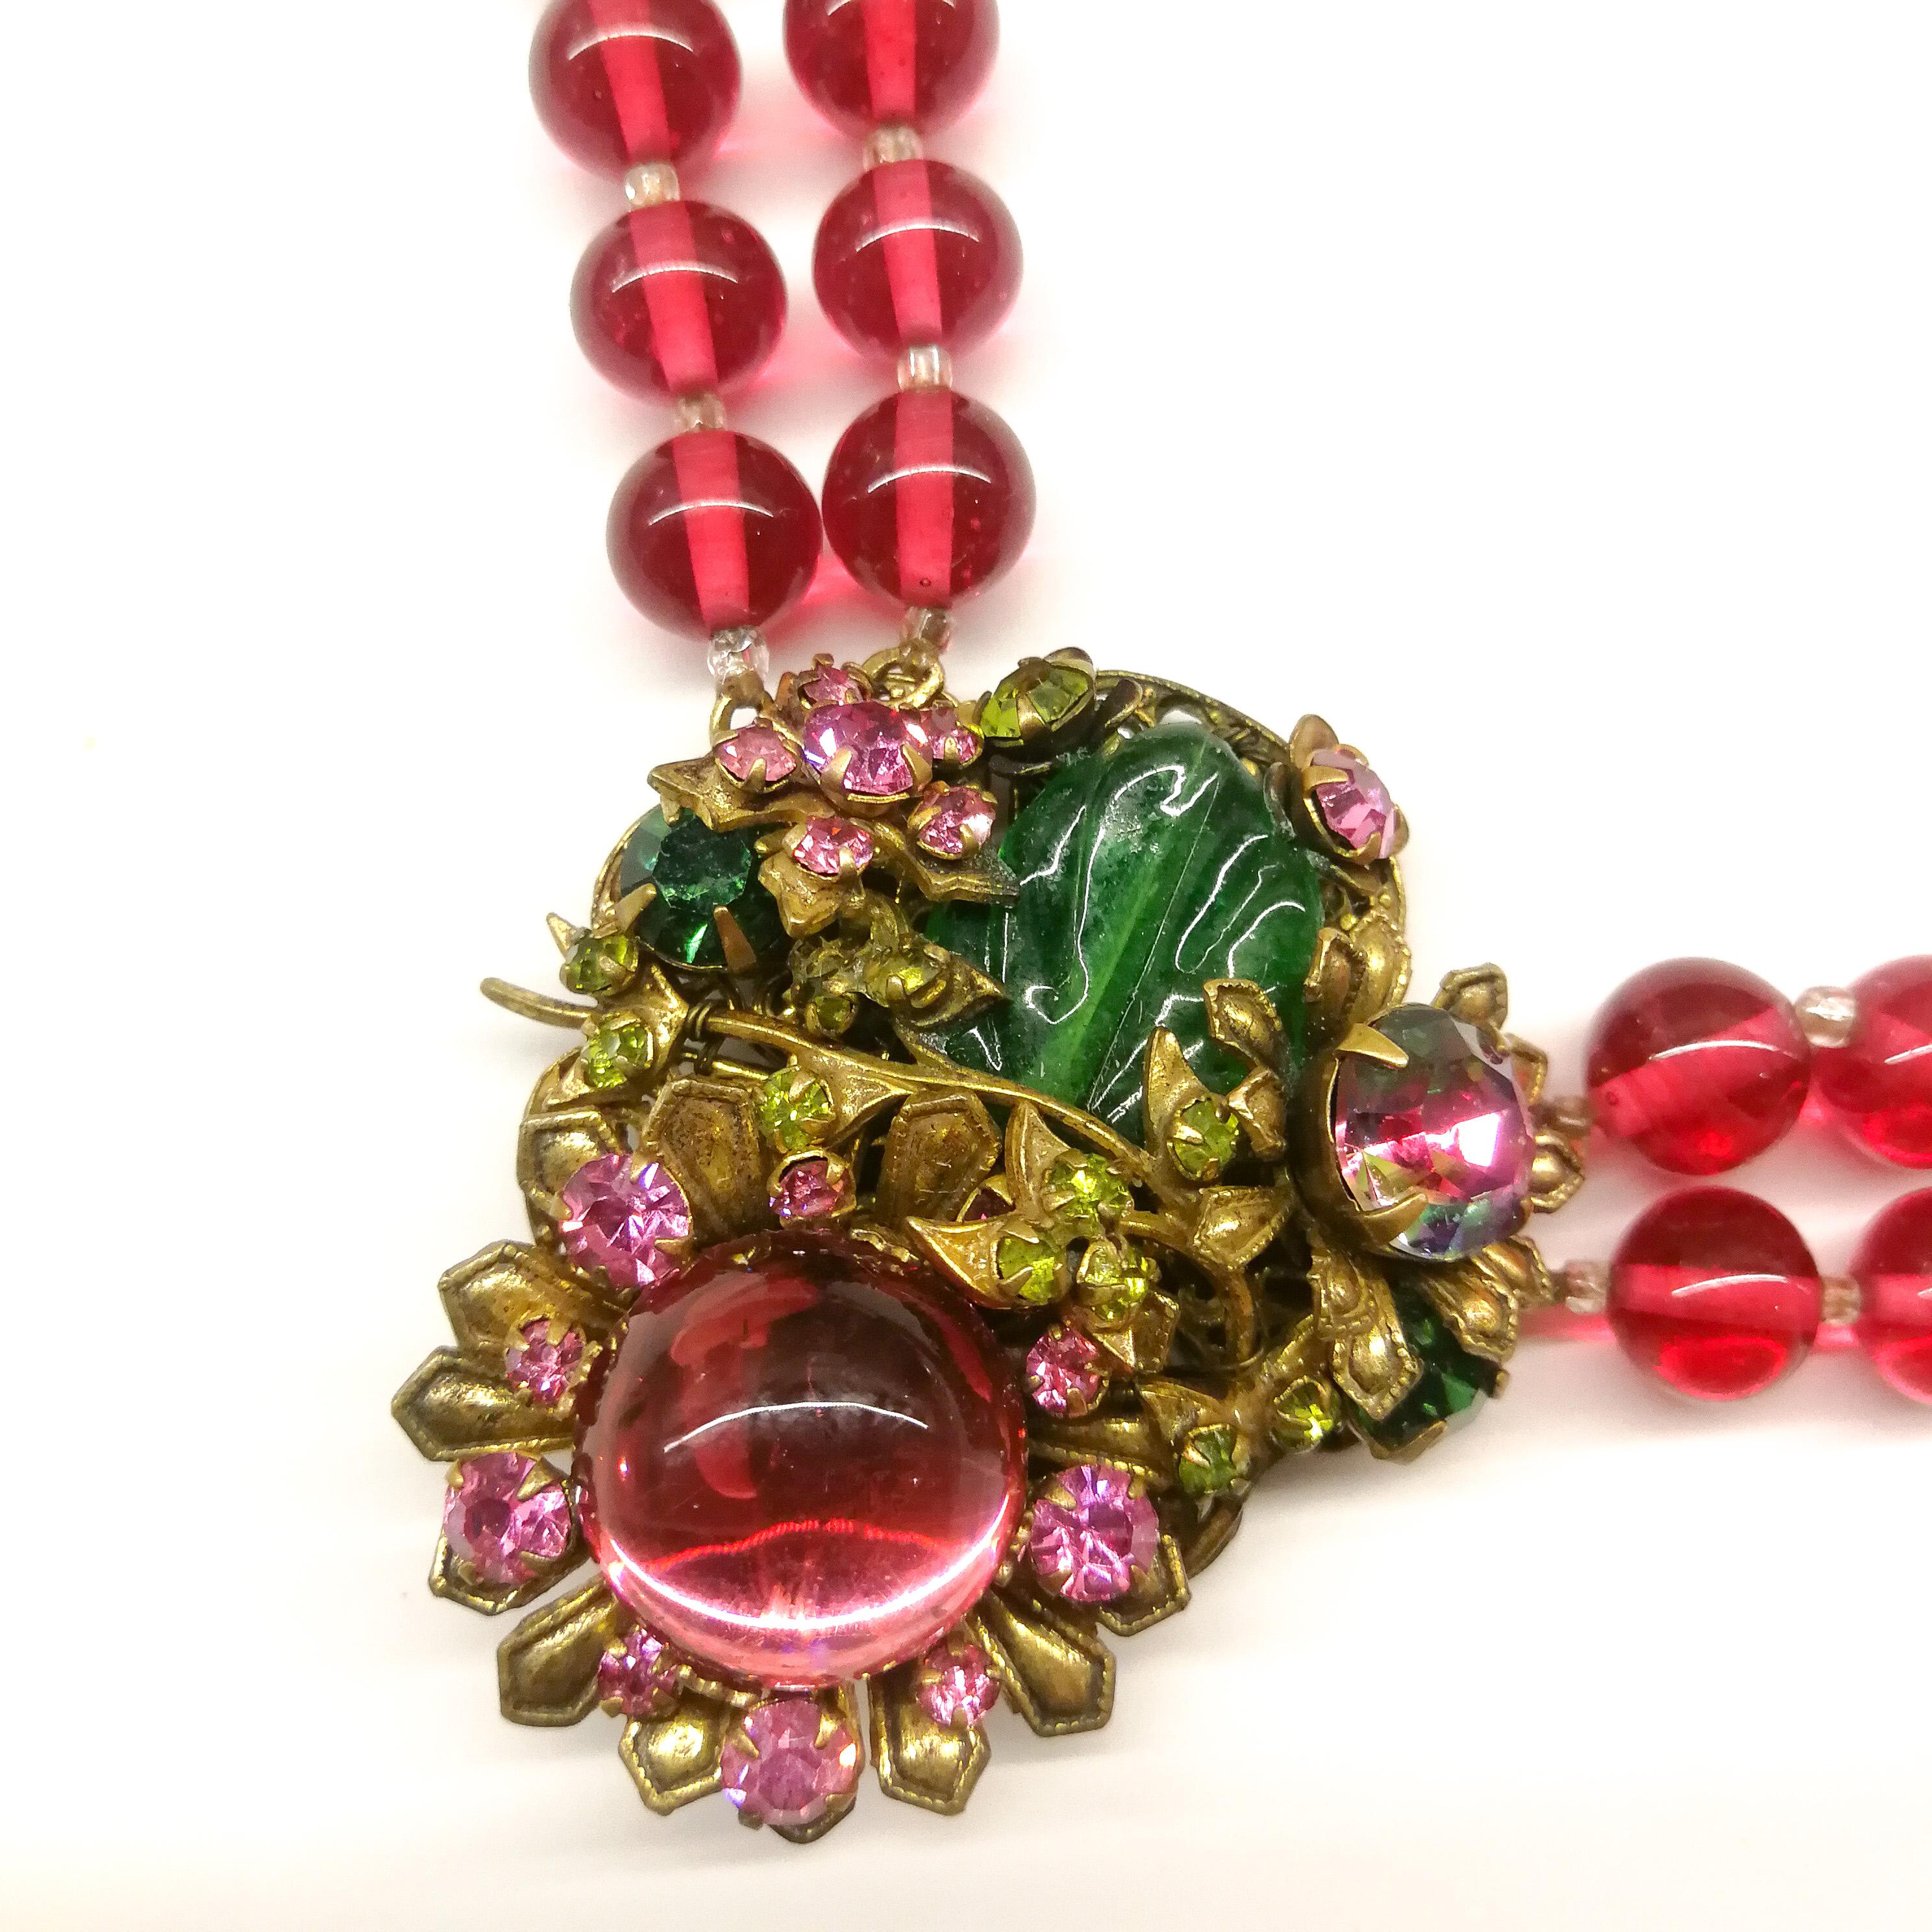 A beautiful, richly coloured necklace designed by Frank Hess for Miriam Haskell in cranberry and emerald glass and pink pastes, set in an antique gilded metal. Consisting of two rows of transparent cranberry beads, with a centre piece at the front